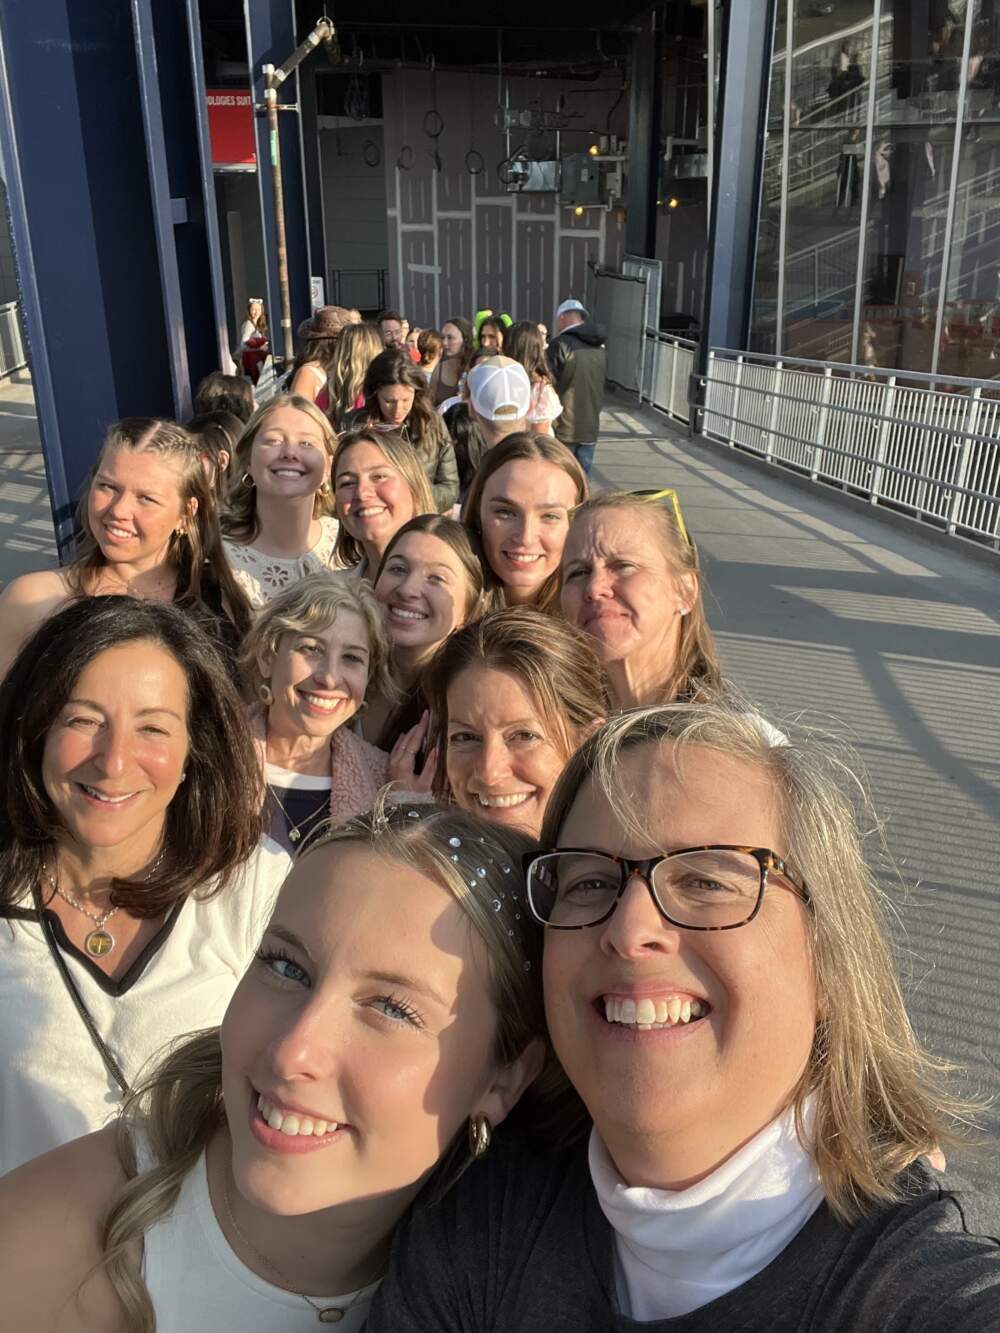 The author, second row center, and the Taylor Swift crew in the "merch" line at Gillette Stadium on May 19, 2023. (Courtesy Joanna Weiss)